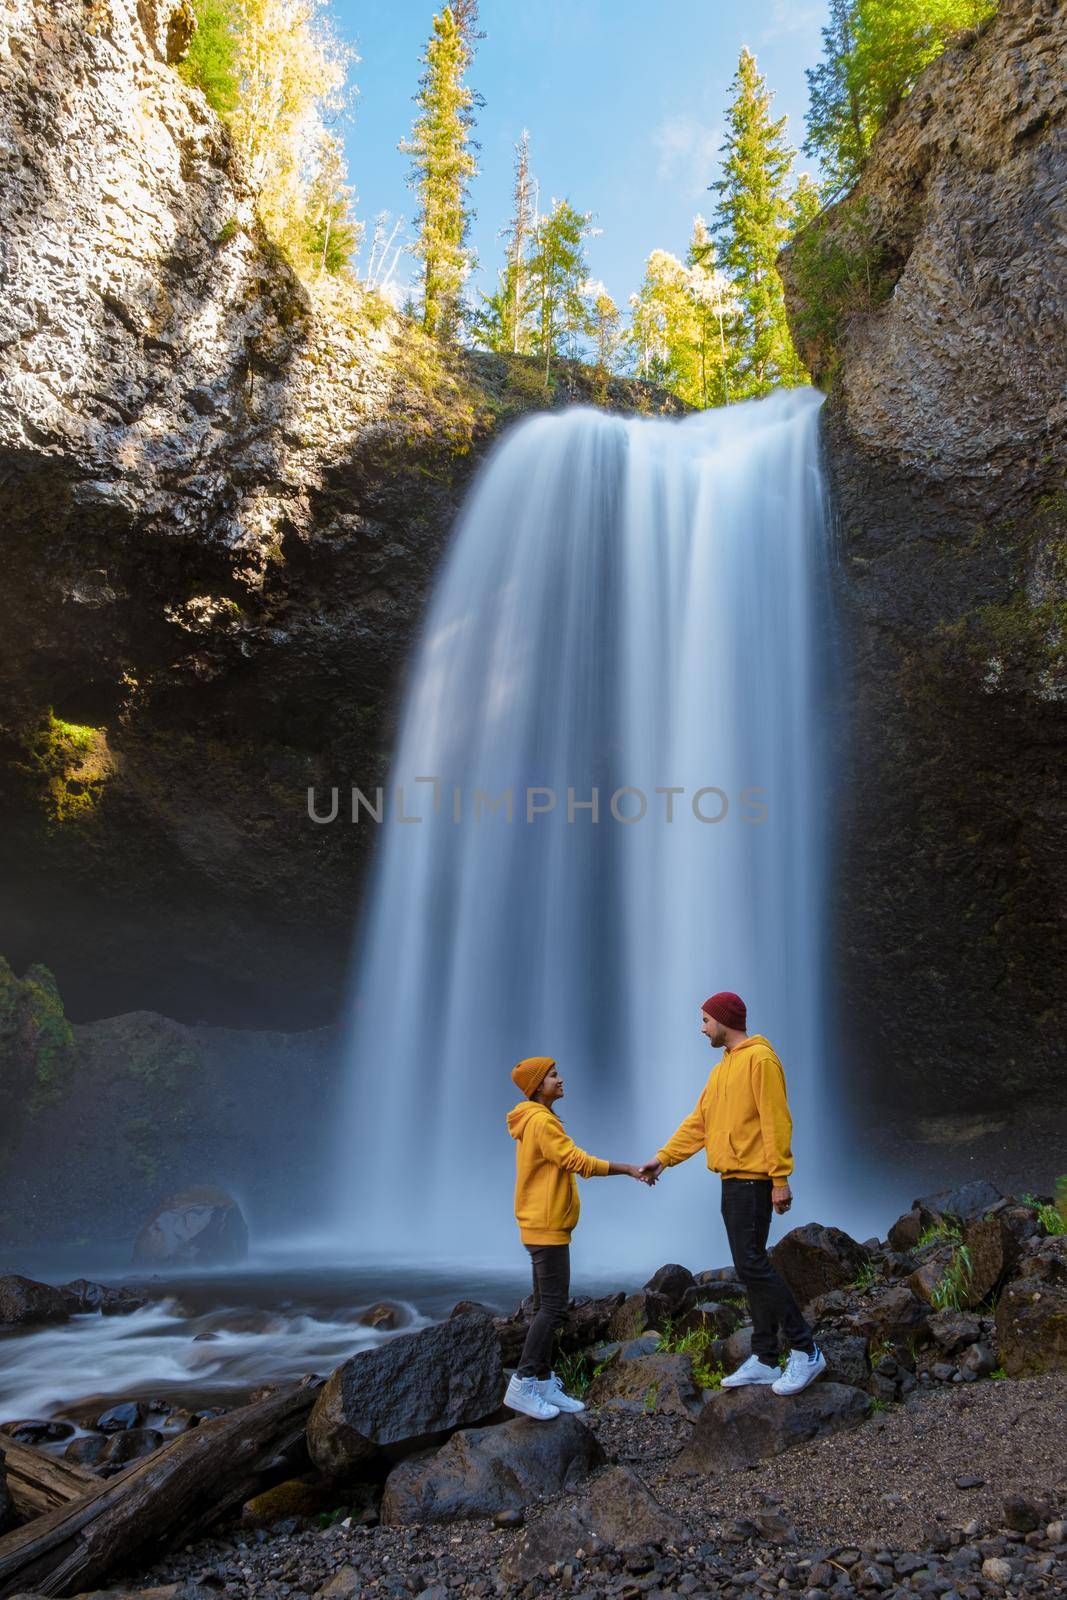 Beautiful waterfall in Canada, couple visit Helmcken Falls, the most famous waterfall in Wells Gray Provincial Park in British Columbia, Canada. couple of men and women standing by a waterfall